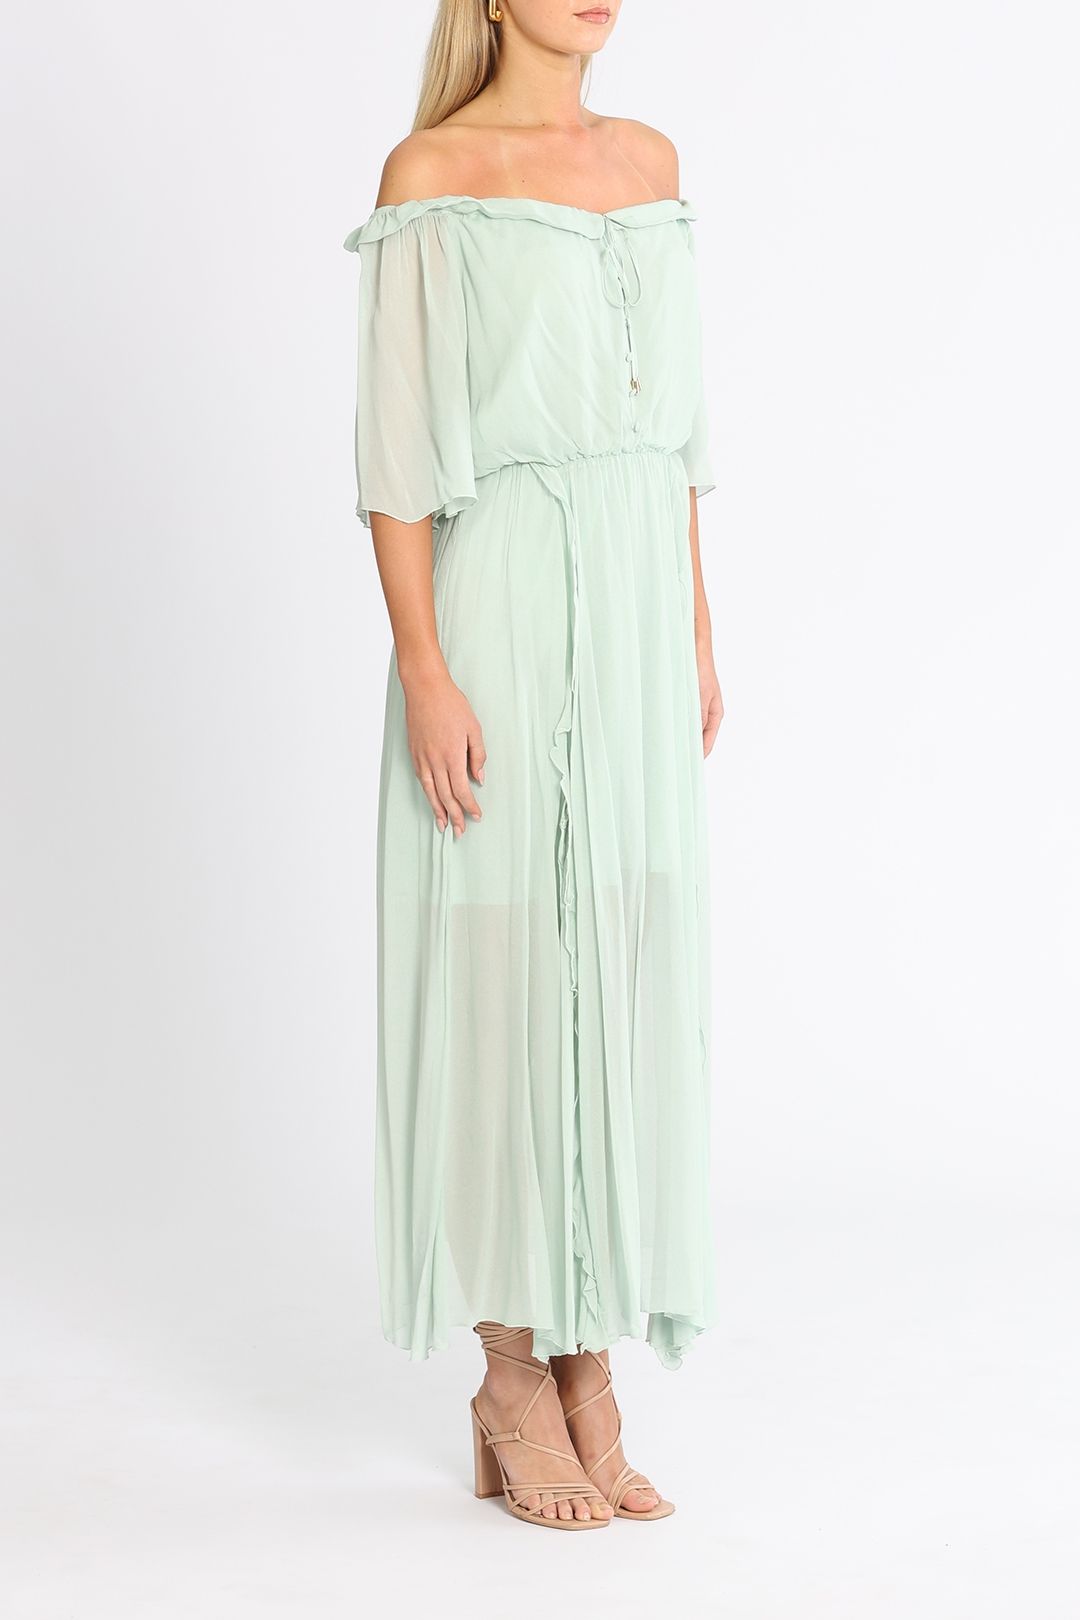 Belle and Bloom Amour Amour Ruffled Maxi Dress Green Semi Sheer